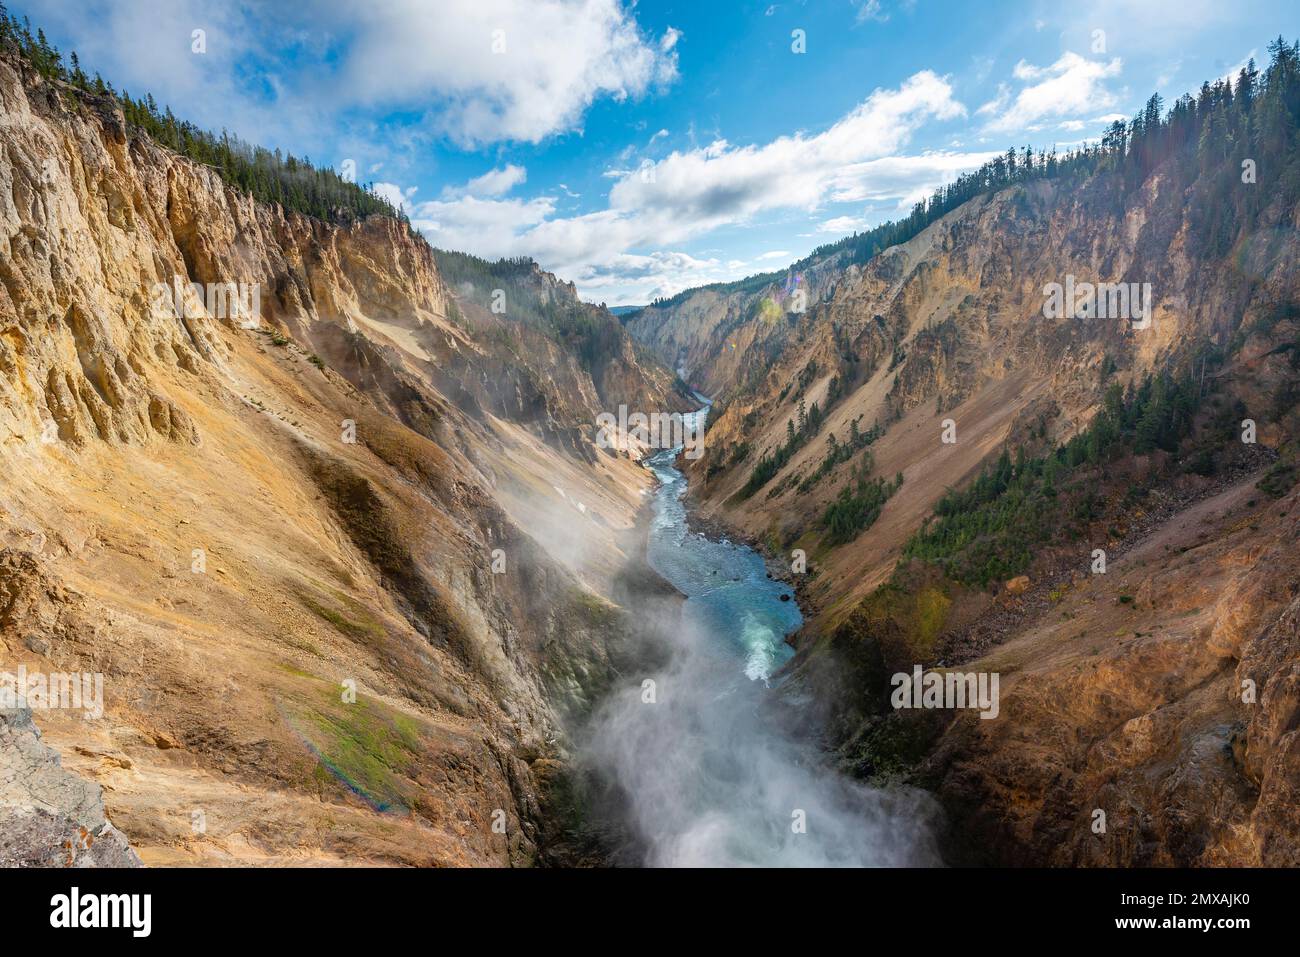 Lower Falls waterfall, Yellowstone River flowing through gorge, Grand Canyon of the Yellowstone, View from North Rim, Brink of the Lower Falls Stock Photo